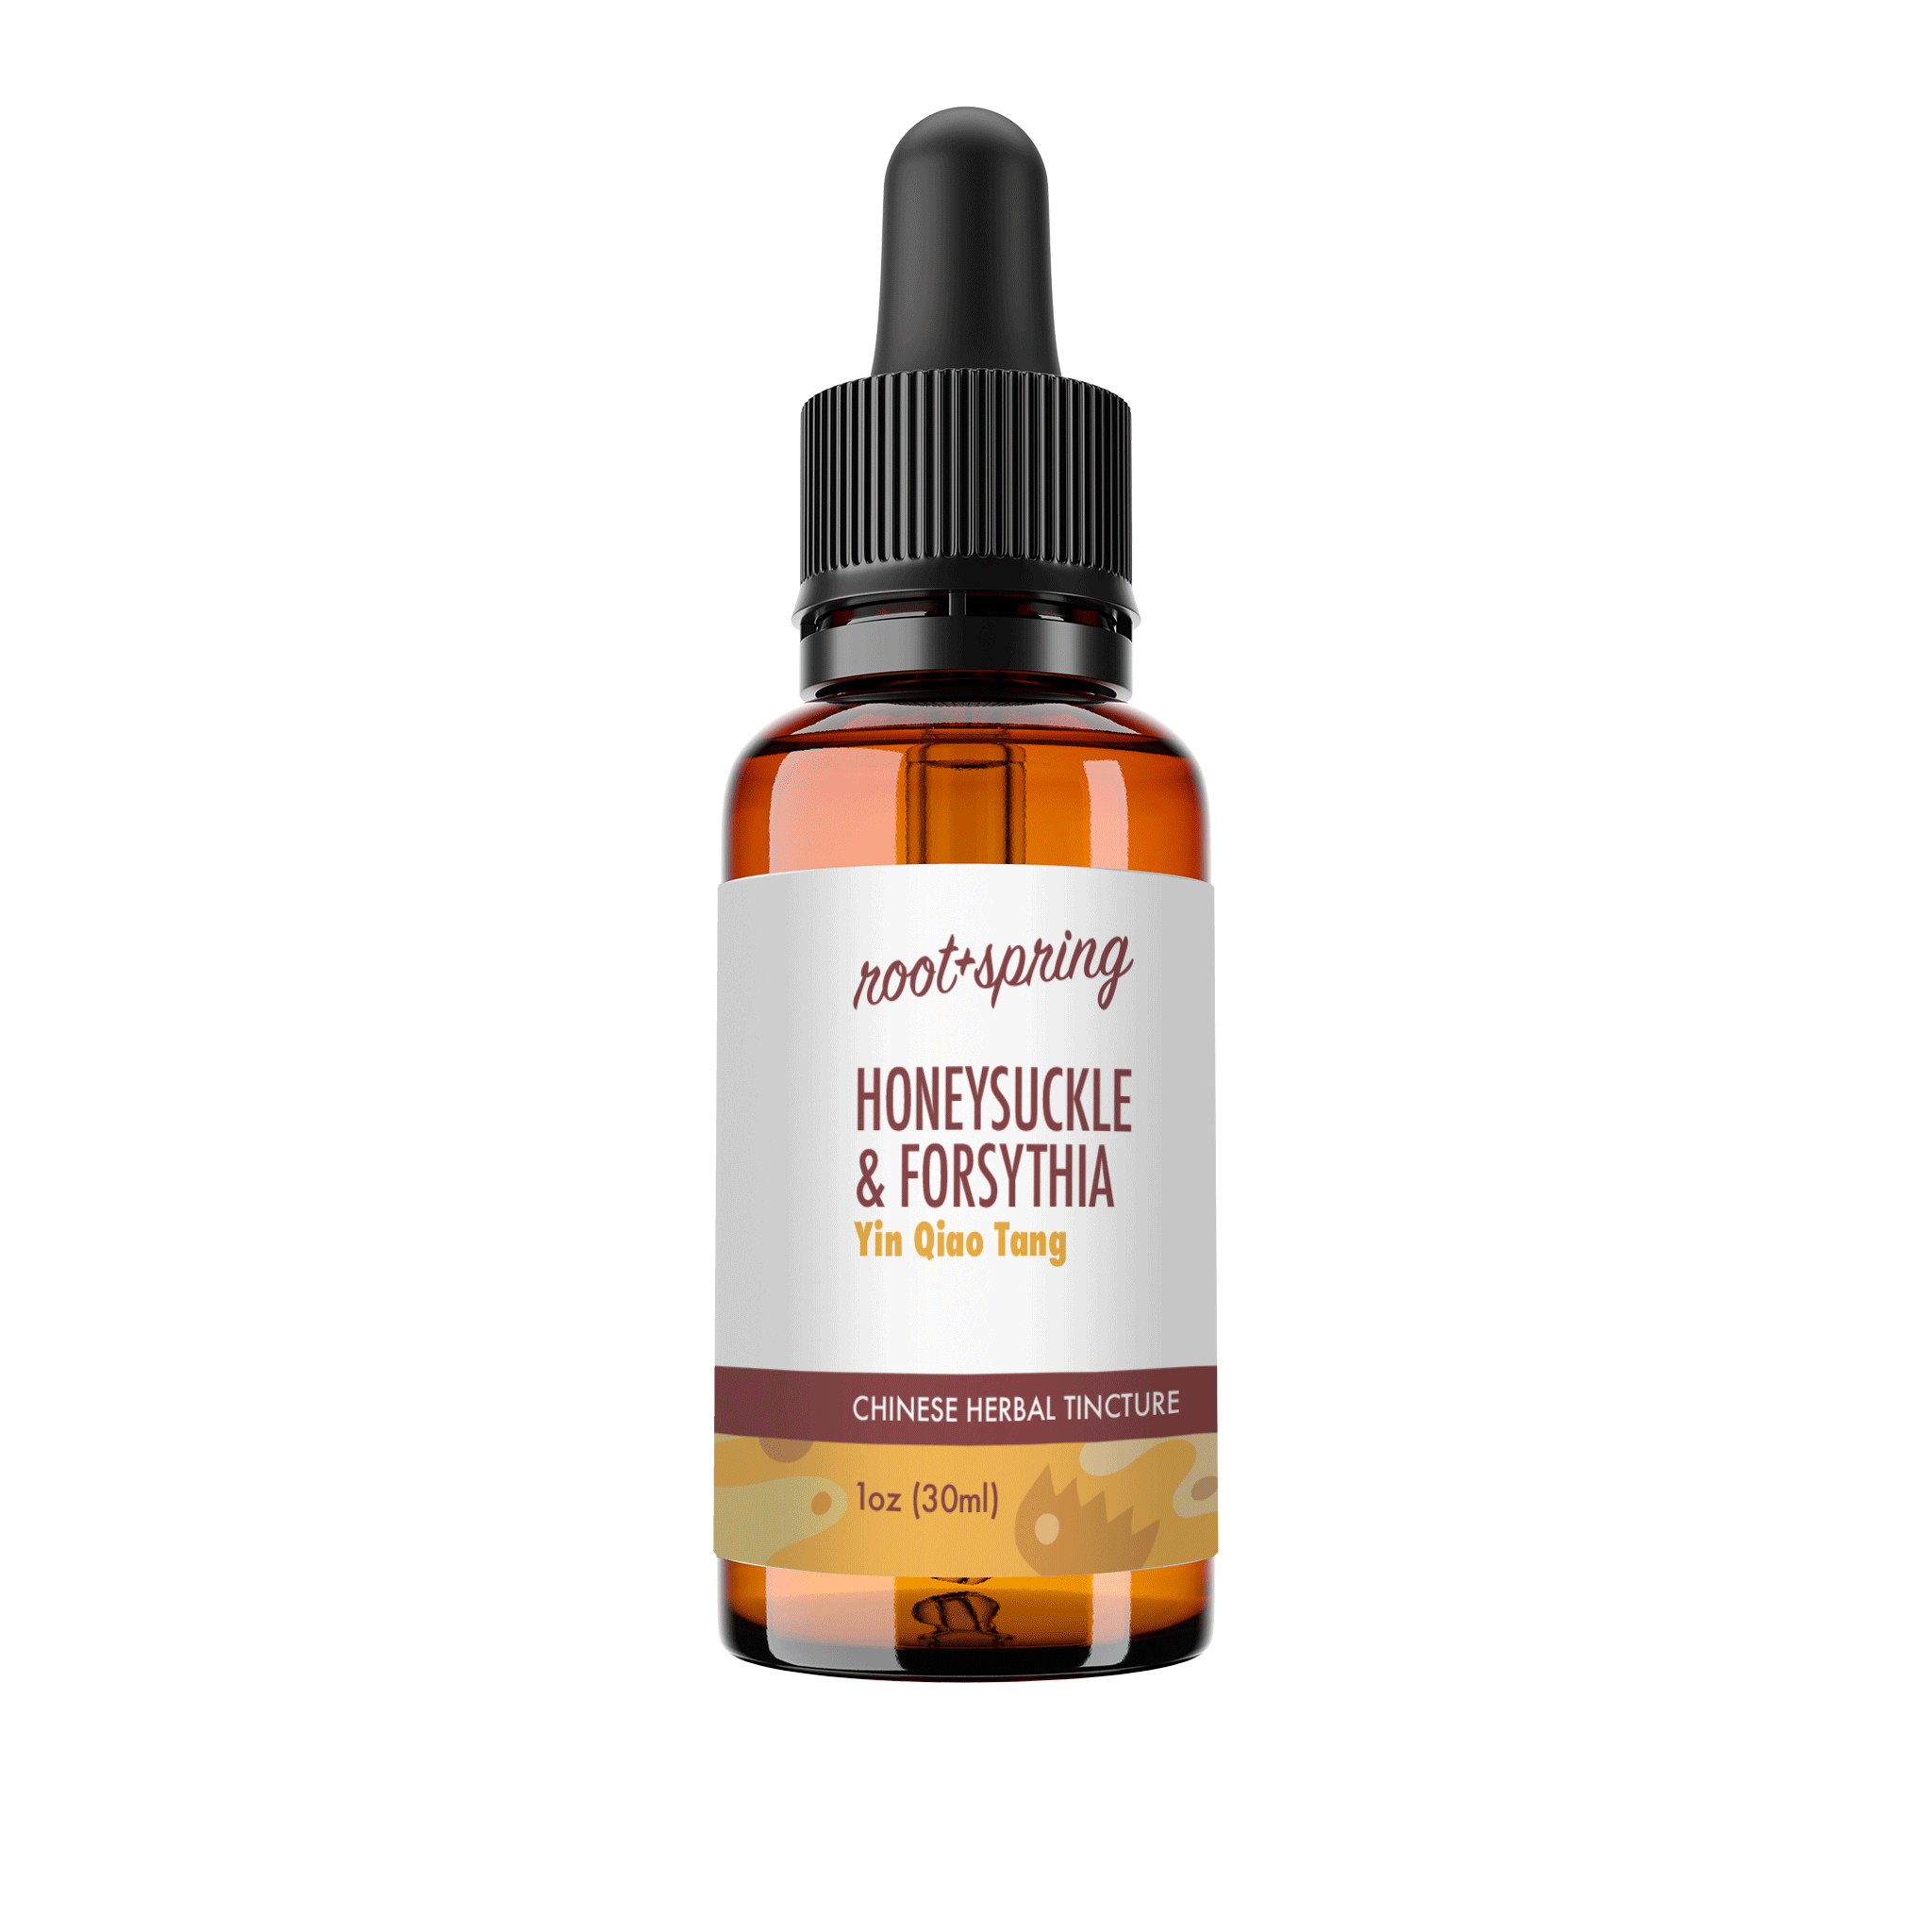 Amber eyedropper-top tincture bottle containing 1 fluid ounce (30 milliliters) of root + spring Honeysuckle and Forsythia Yin Qiao Tang Chinese herbal tincture.